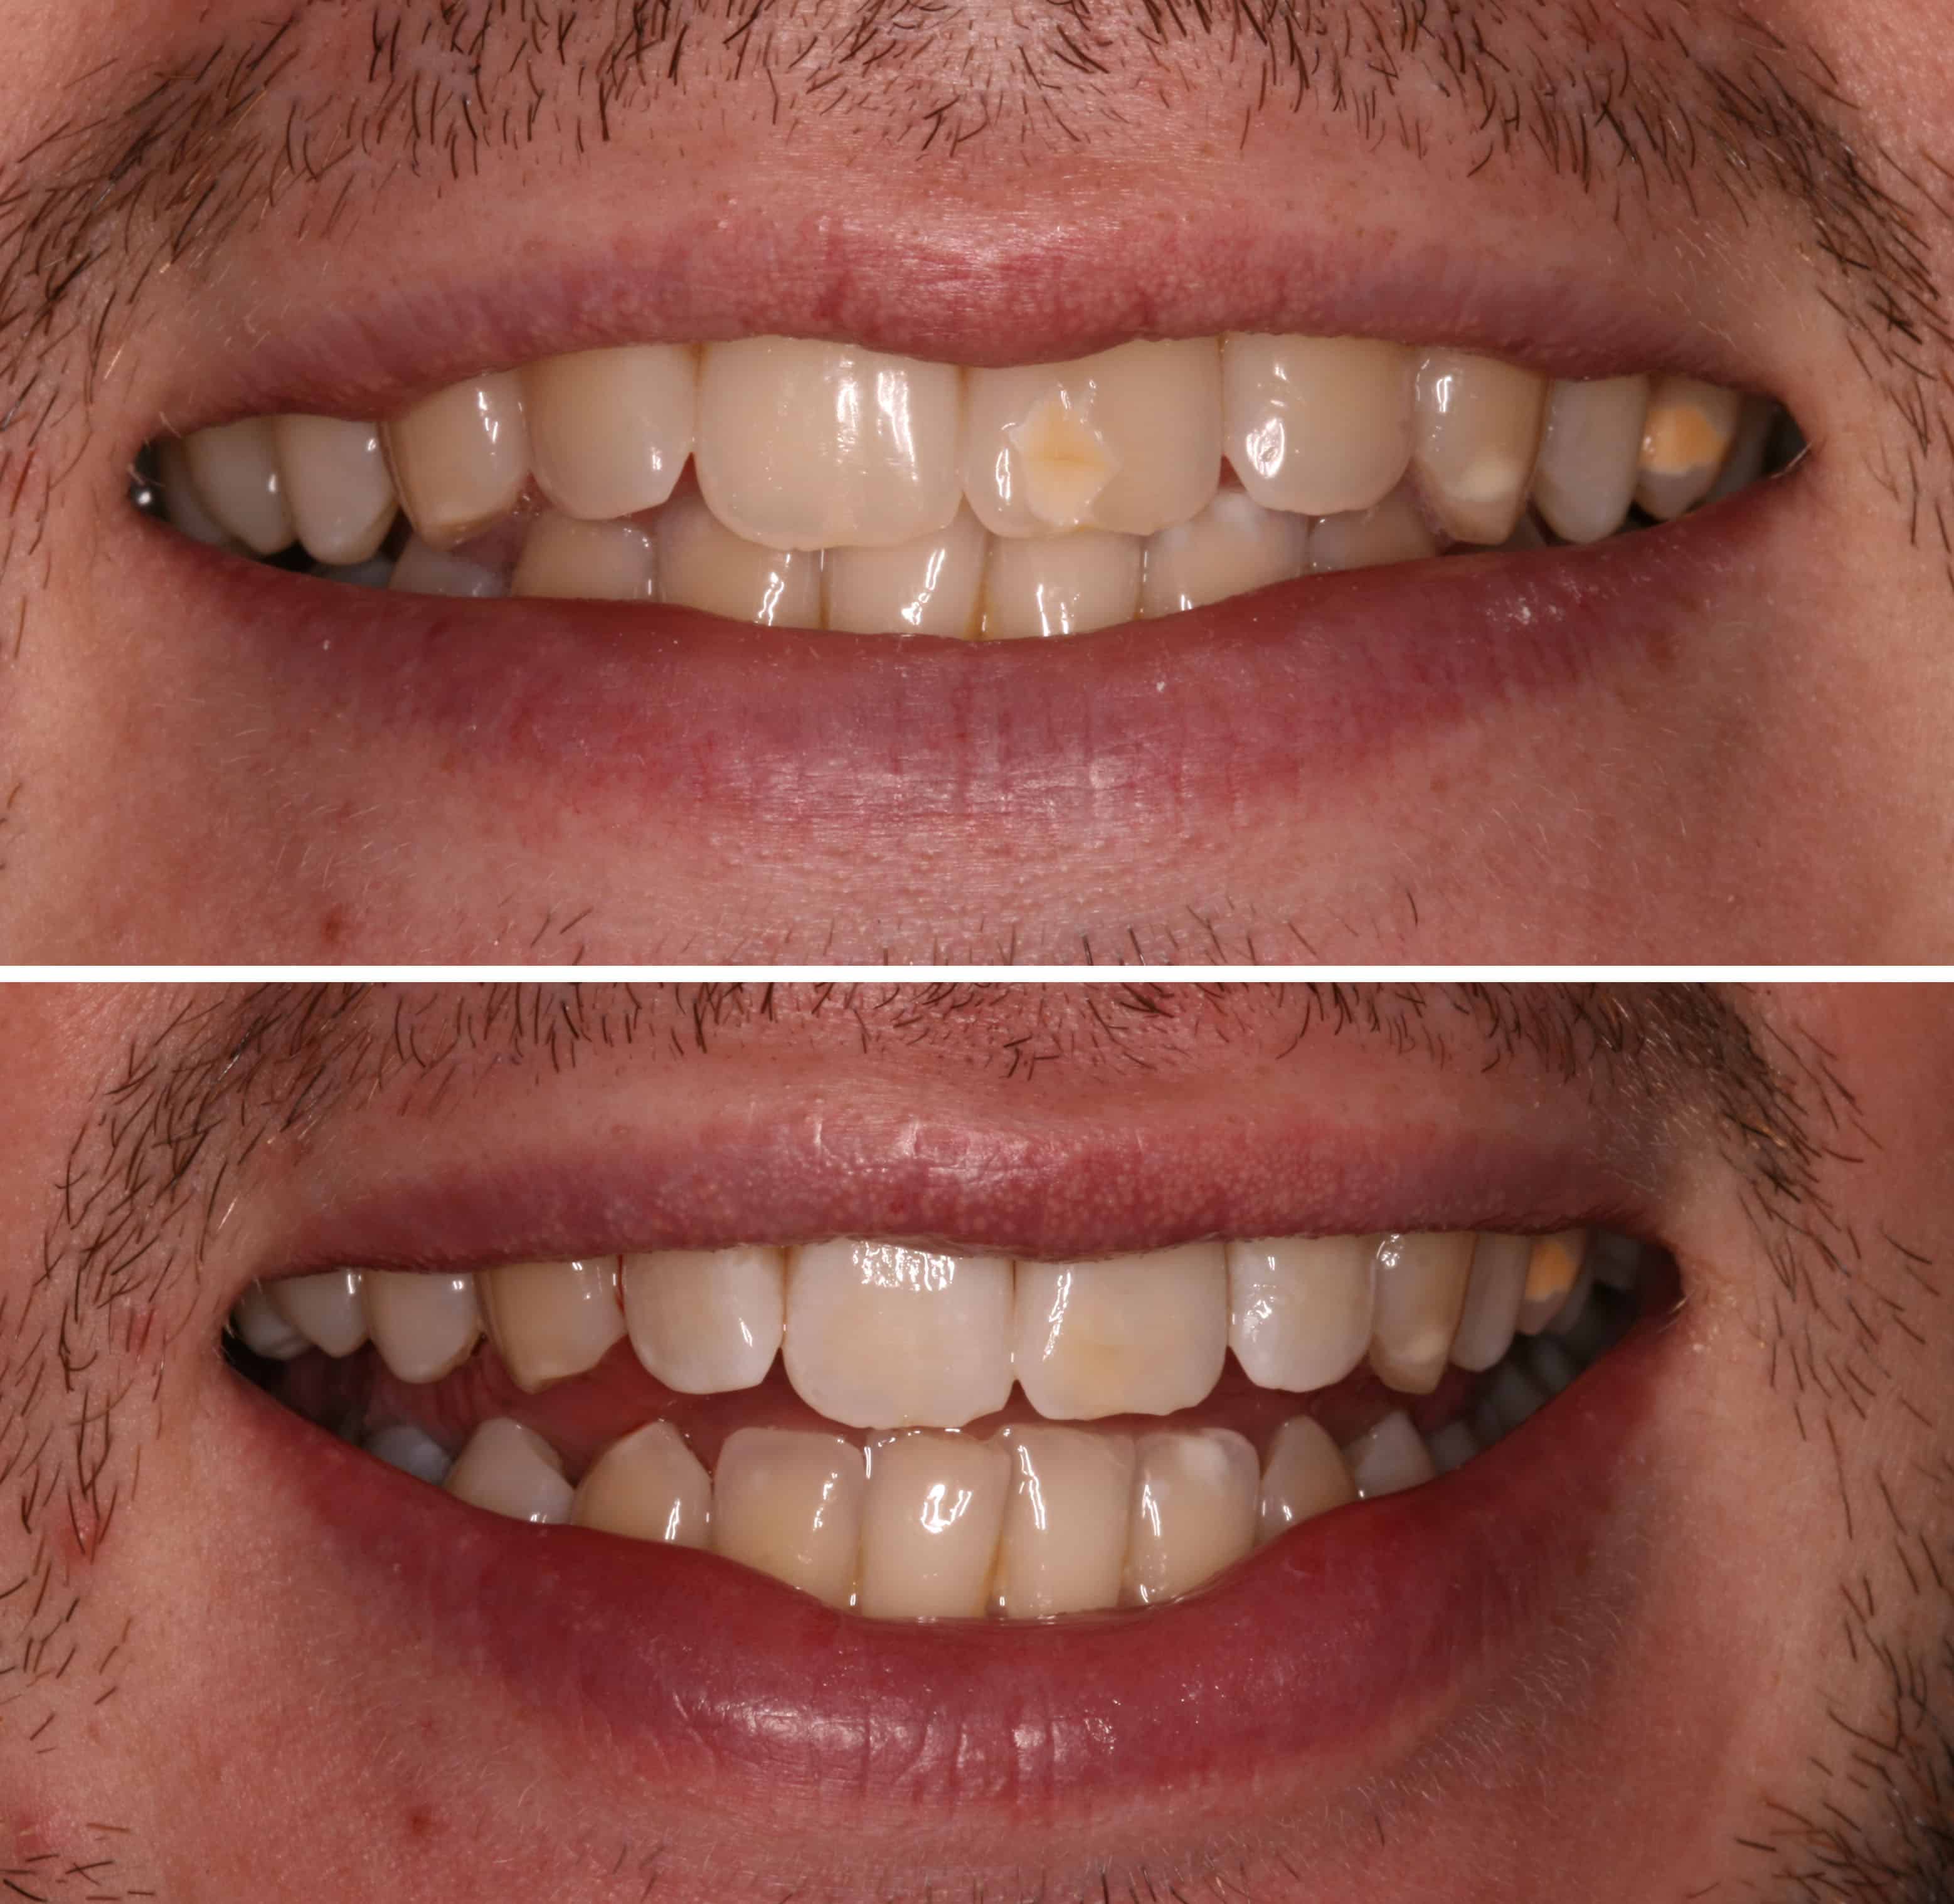 ICON Treatment By Dr Ben Walker At Beverley Dental Raynes Park London